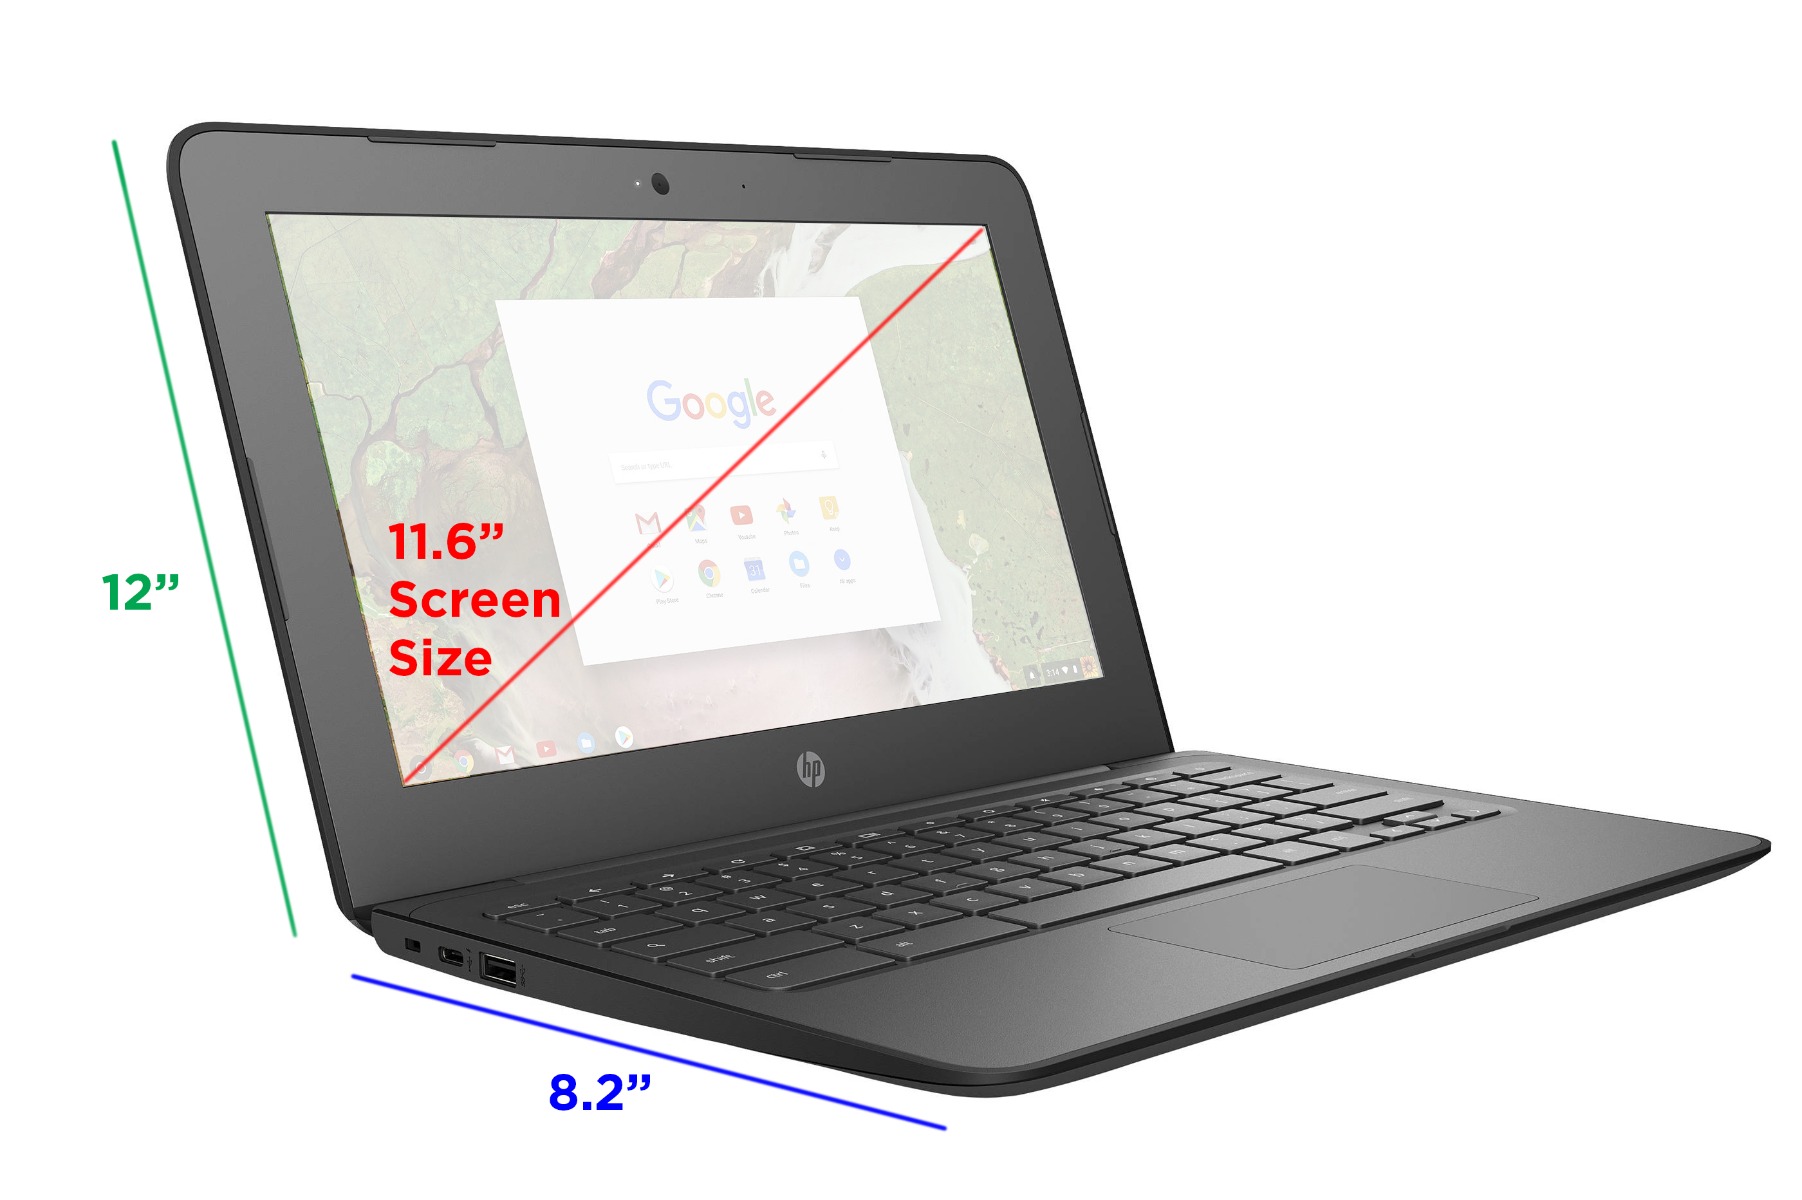 HP G6 Chromebook with Dimensions